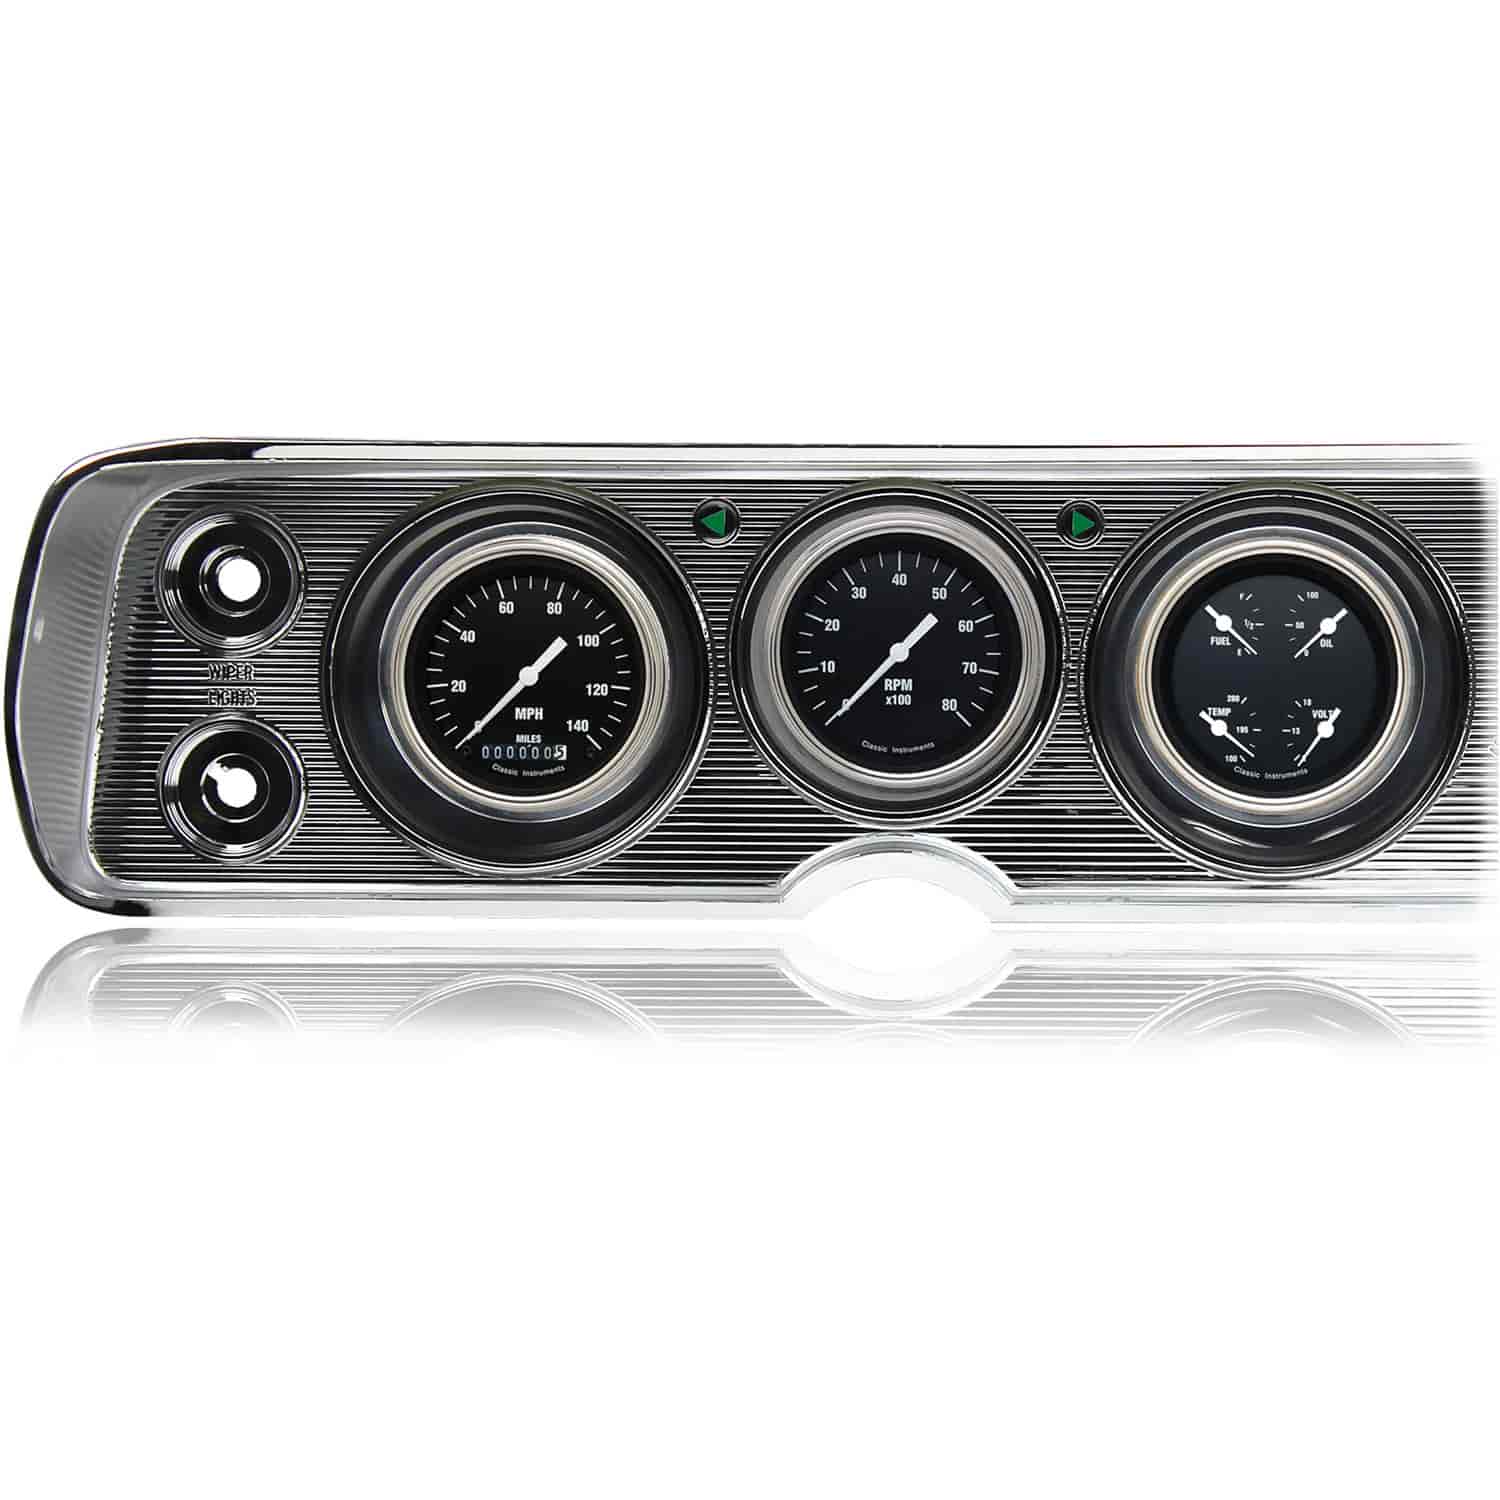 Hot Rod Series Gauge Package 1964-65 Chevelle Includes: